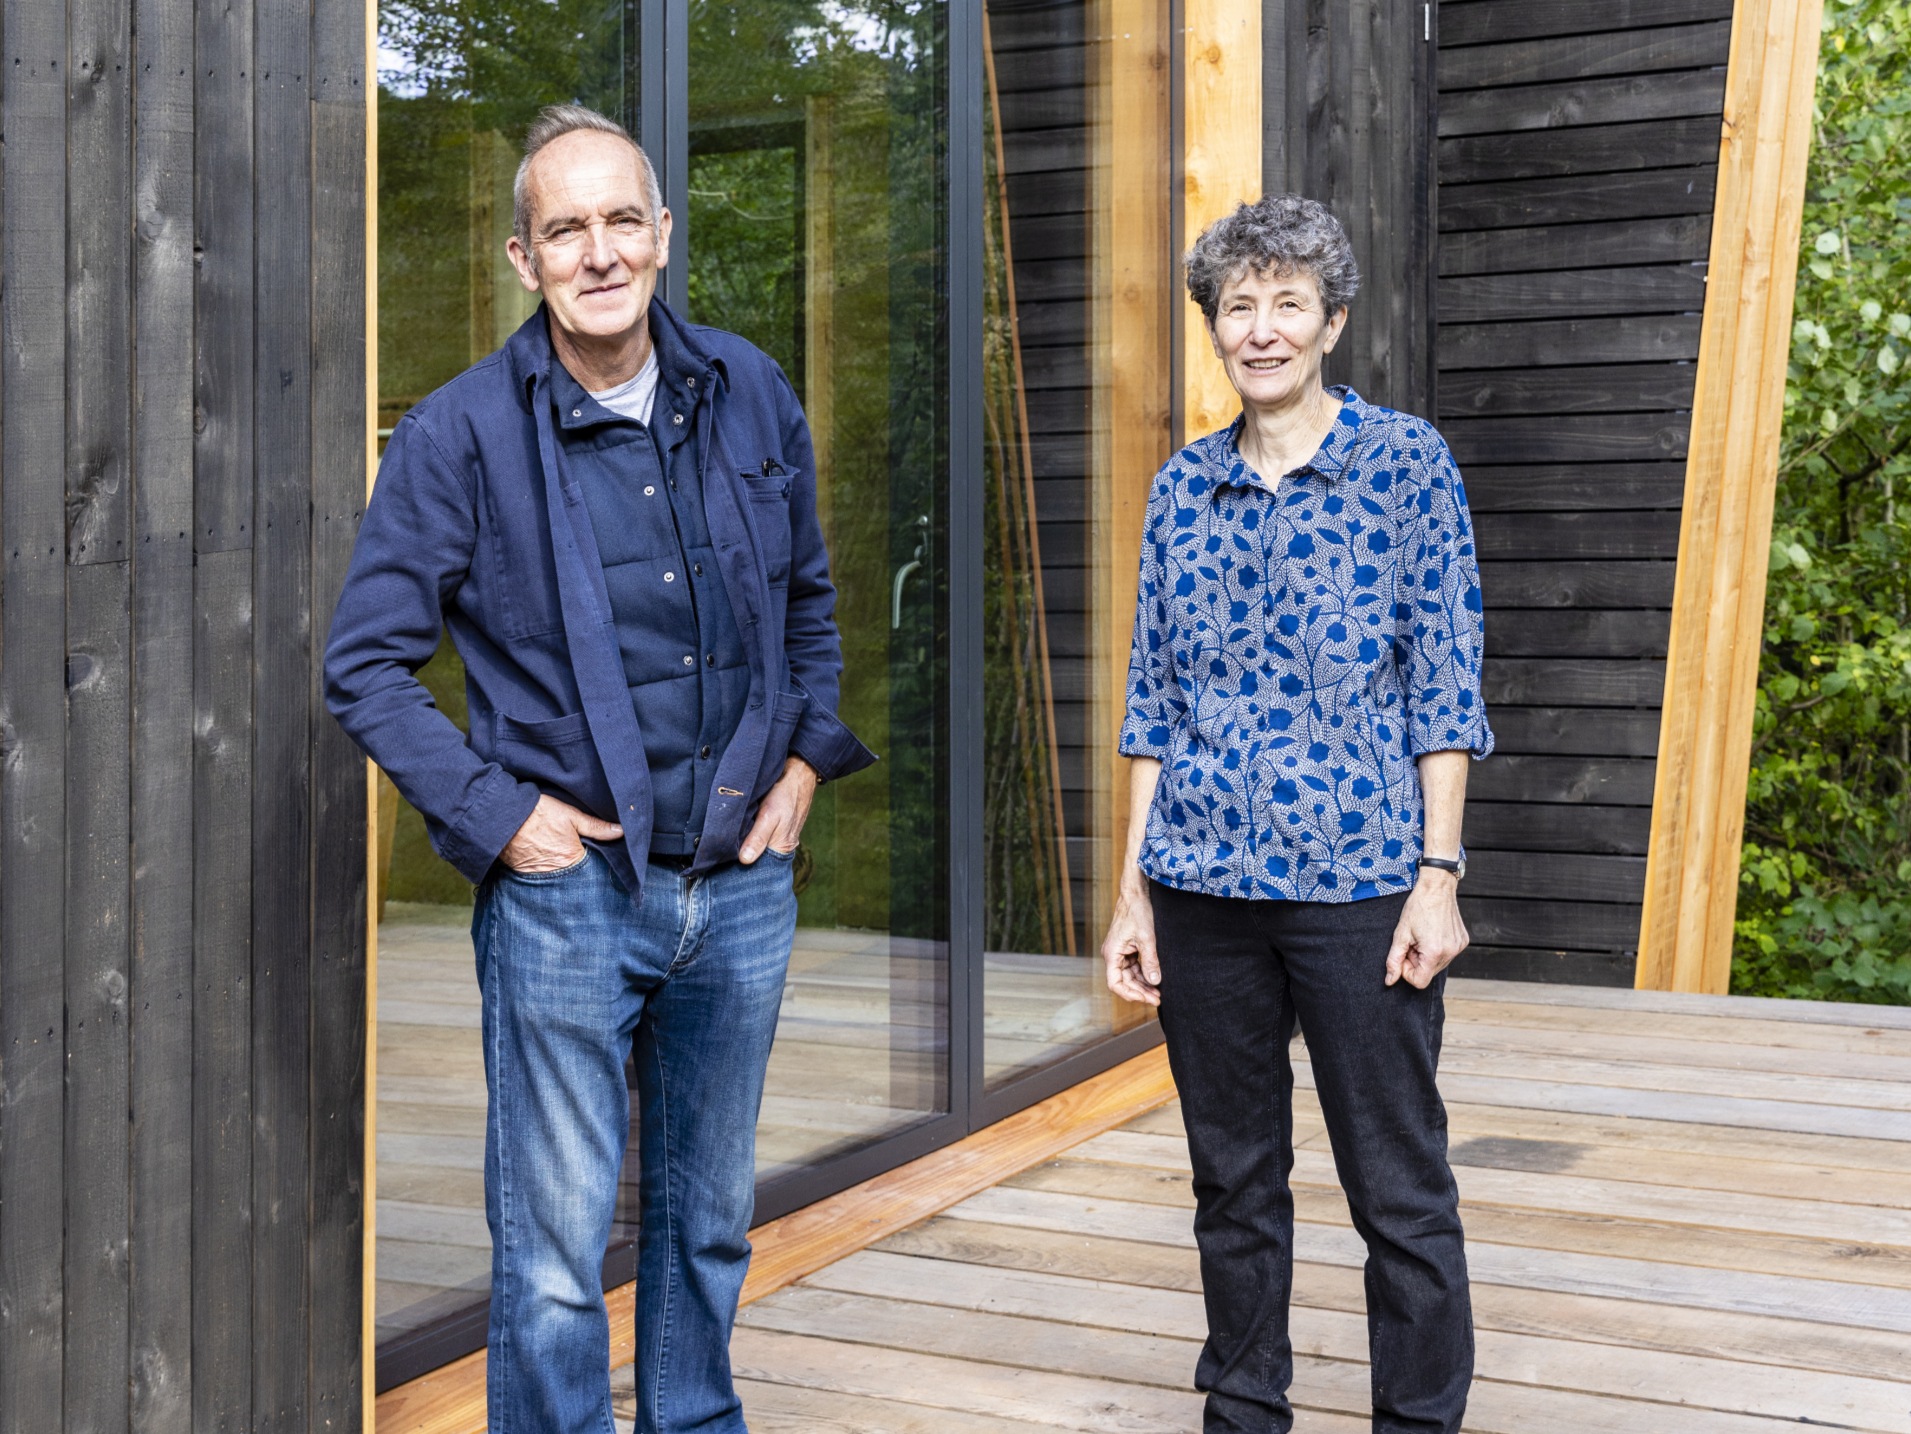 Grand Designs Series 24 Episode 5 - South Heredforshire - Kevin and Lucinda